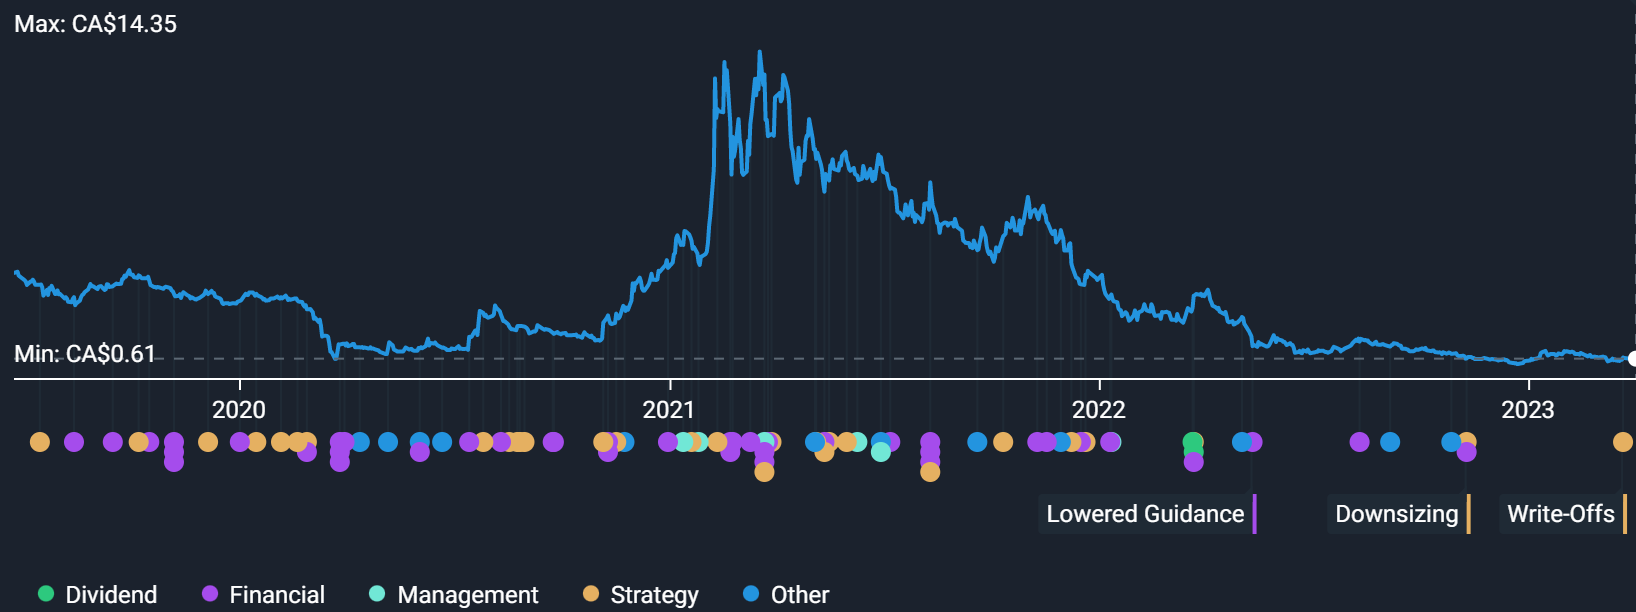 Mogo 4-Year Price Chart | Simply Wall St.